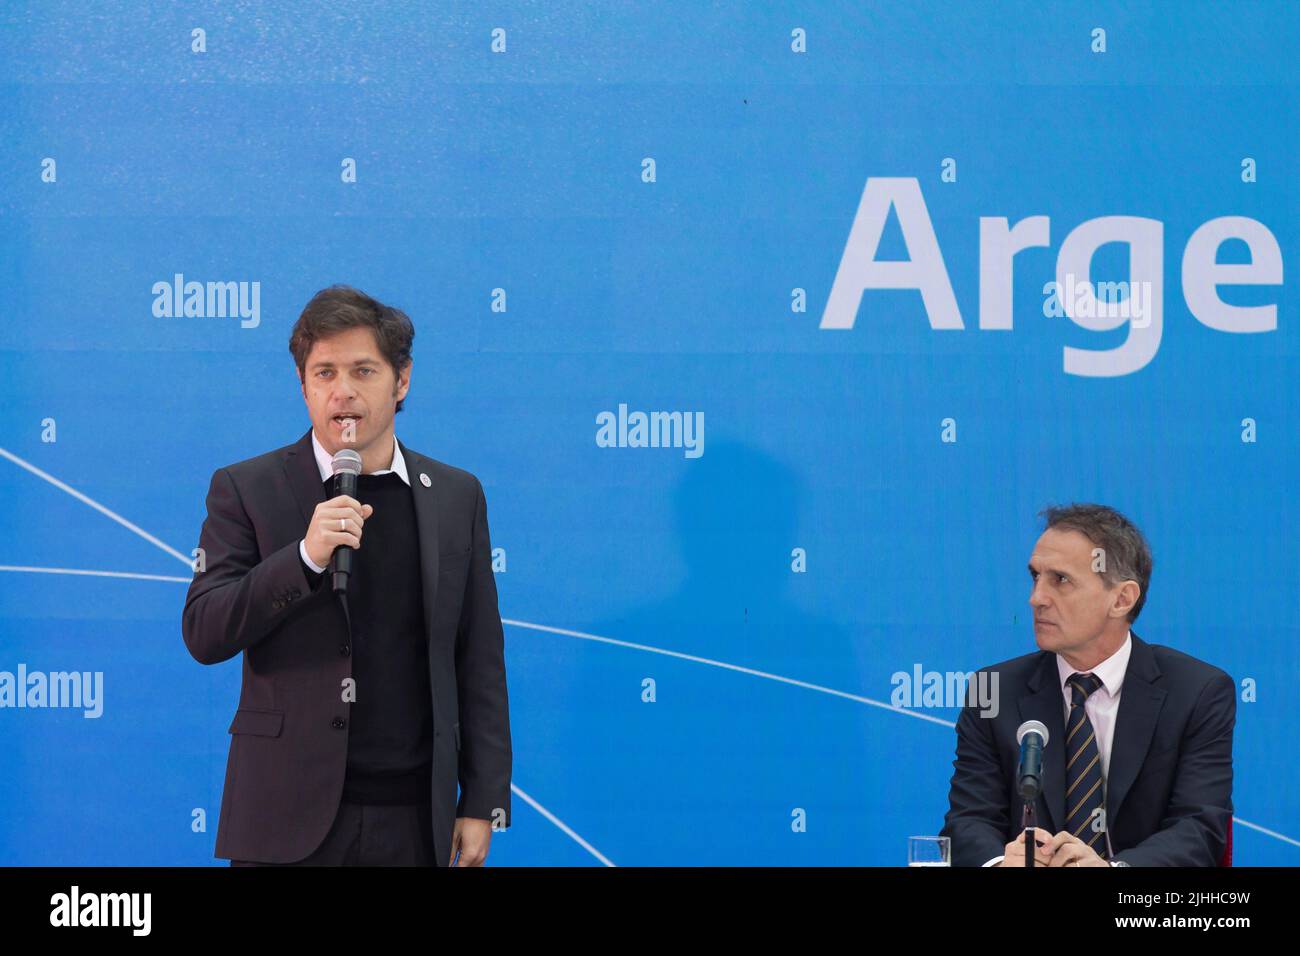 Buenos Aires, Argentina, 18th July 2022. President Alberto Fernández led the presentation of Argentina Grande, Infrastructure Plan for the Development of the Nation, together with the Minister of Public Works, Gabriel Katopodis. The Governor of the Province of Buenos Aires Axel Kicillof giving a few words at the event. (Credit: Esteban Osorio/Alamy Live News) Stock Photo